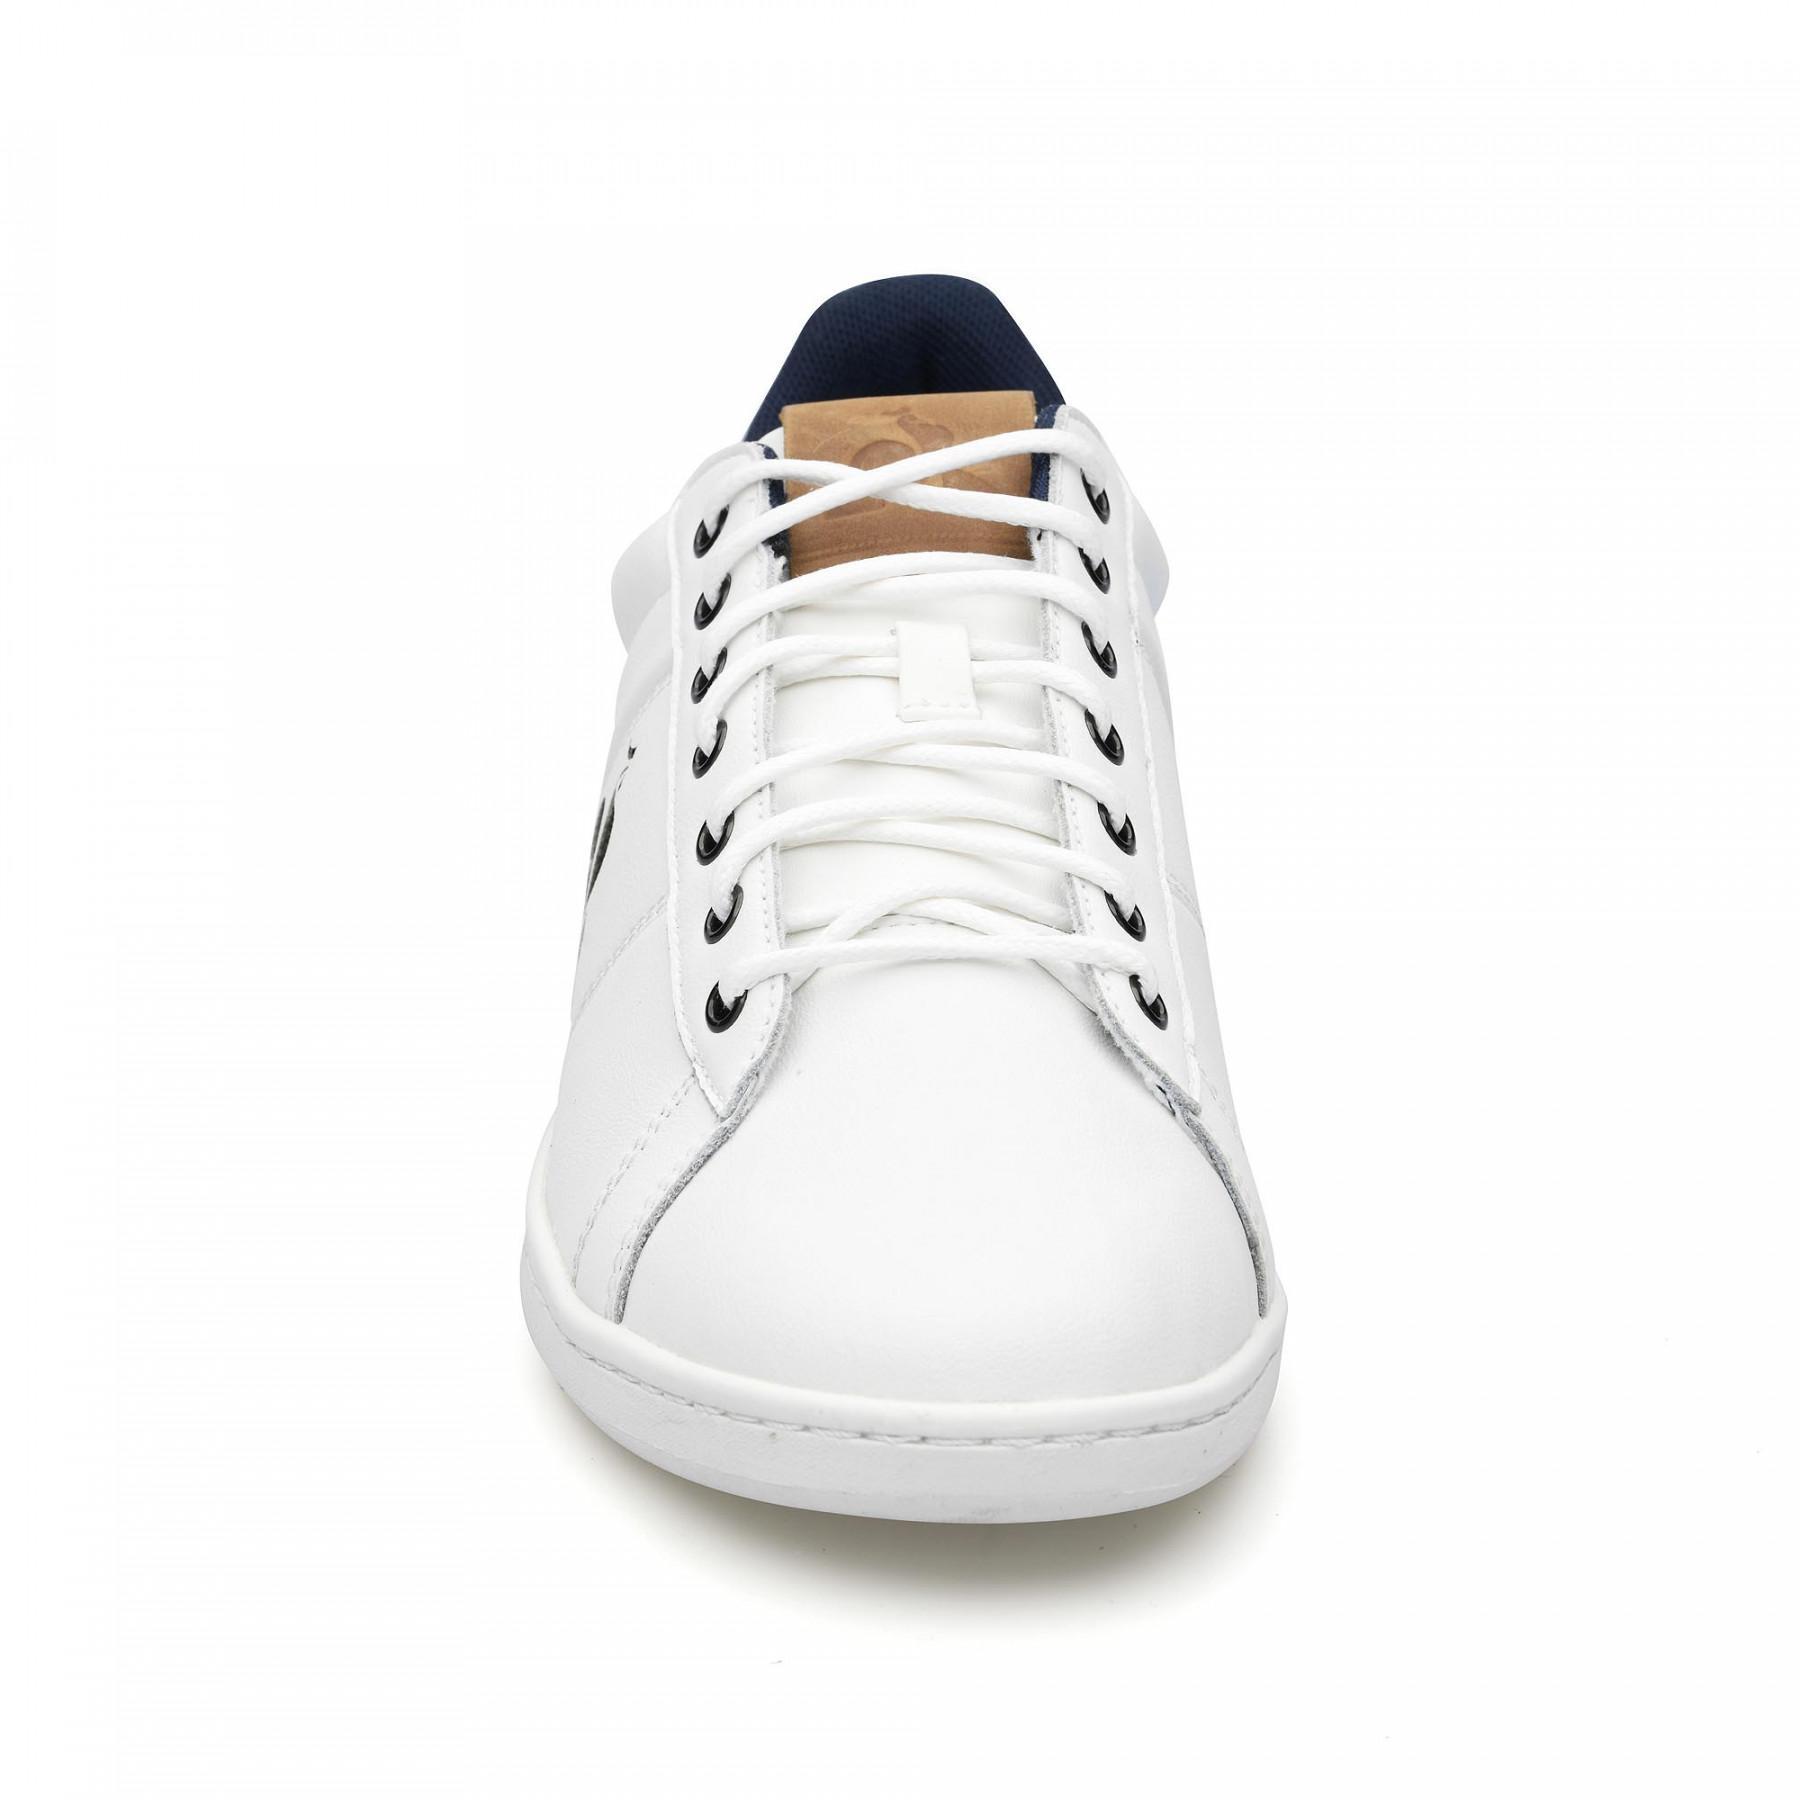 Formadores Le Coq Sportif Master court waxy